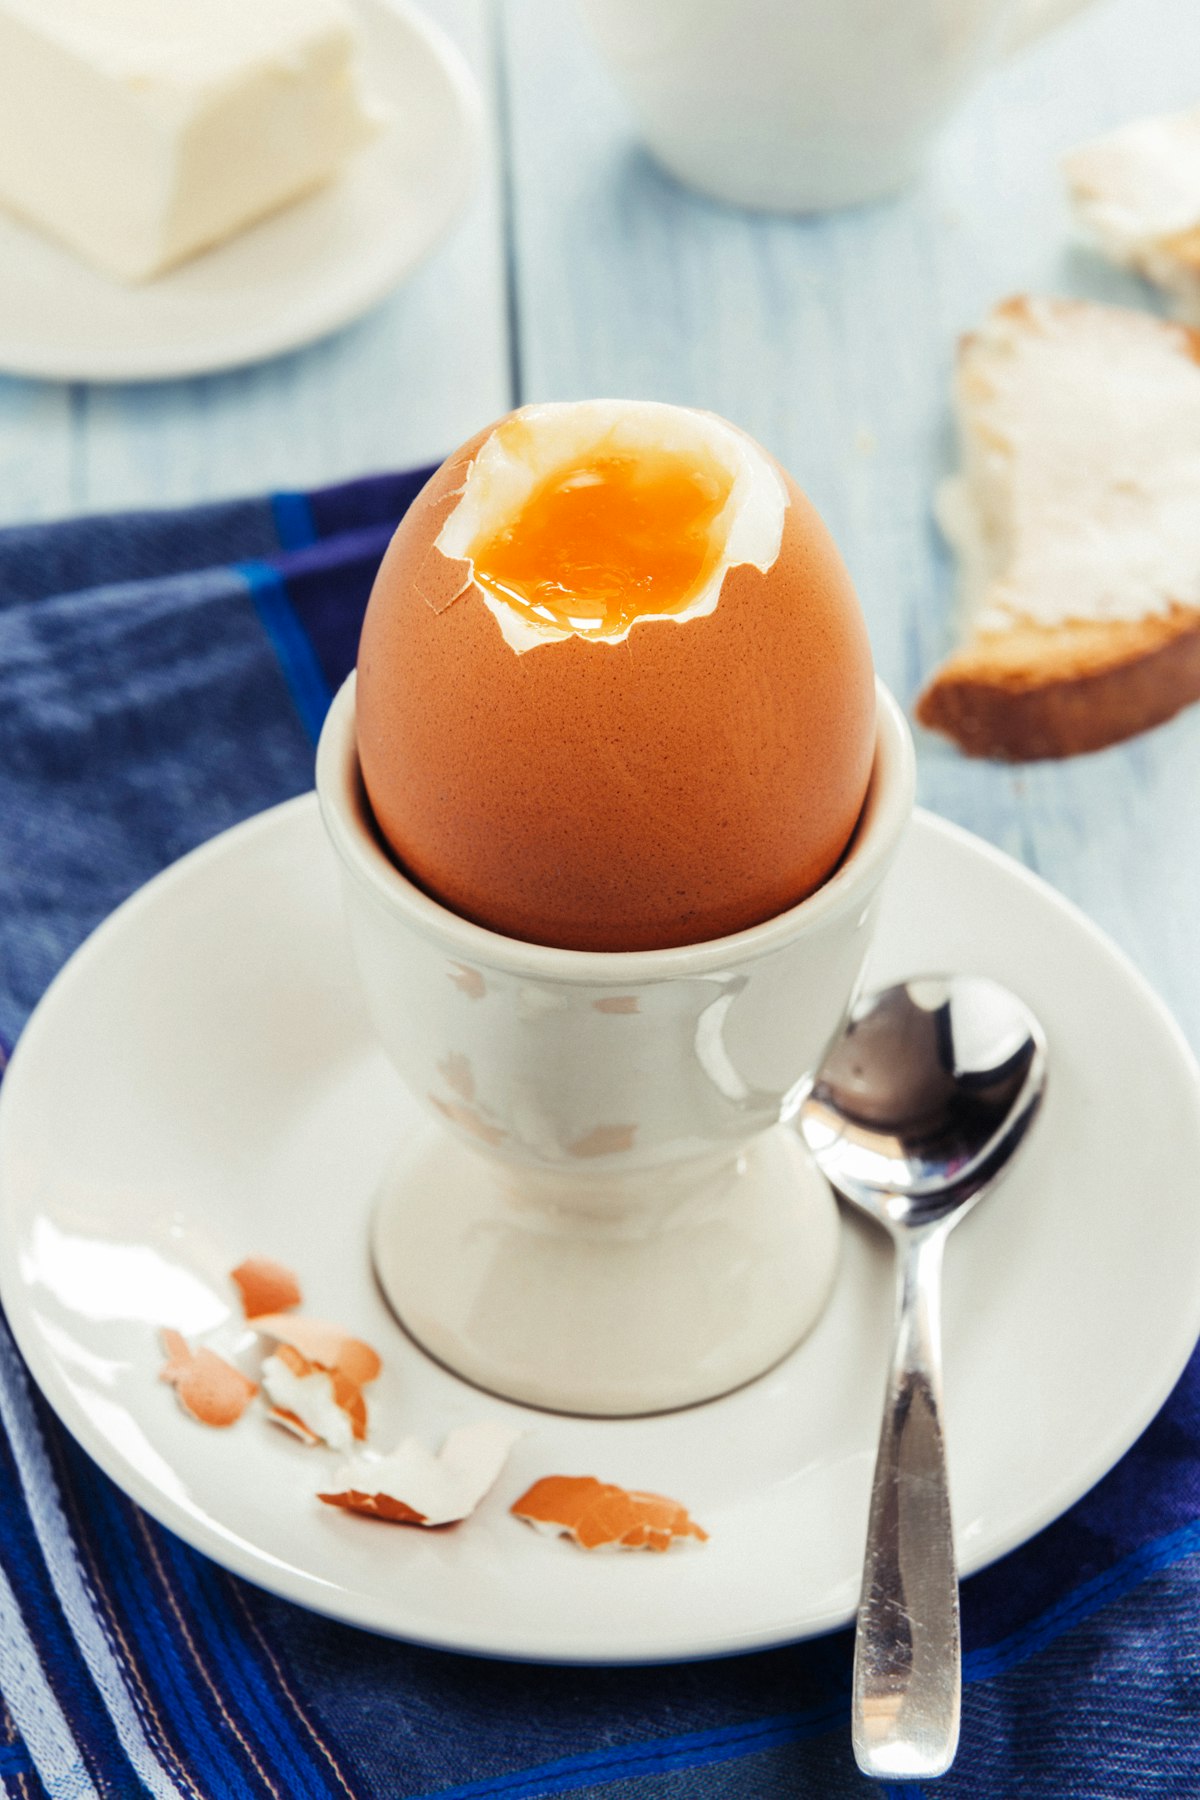 Get Cracking On Perfecting Your Breakfast With The Best Egg Cooker